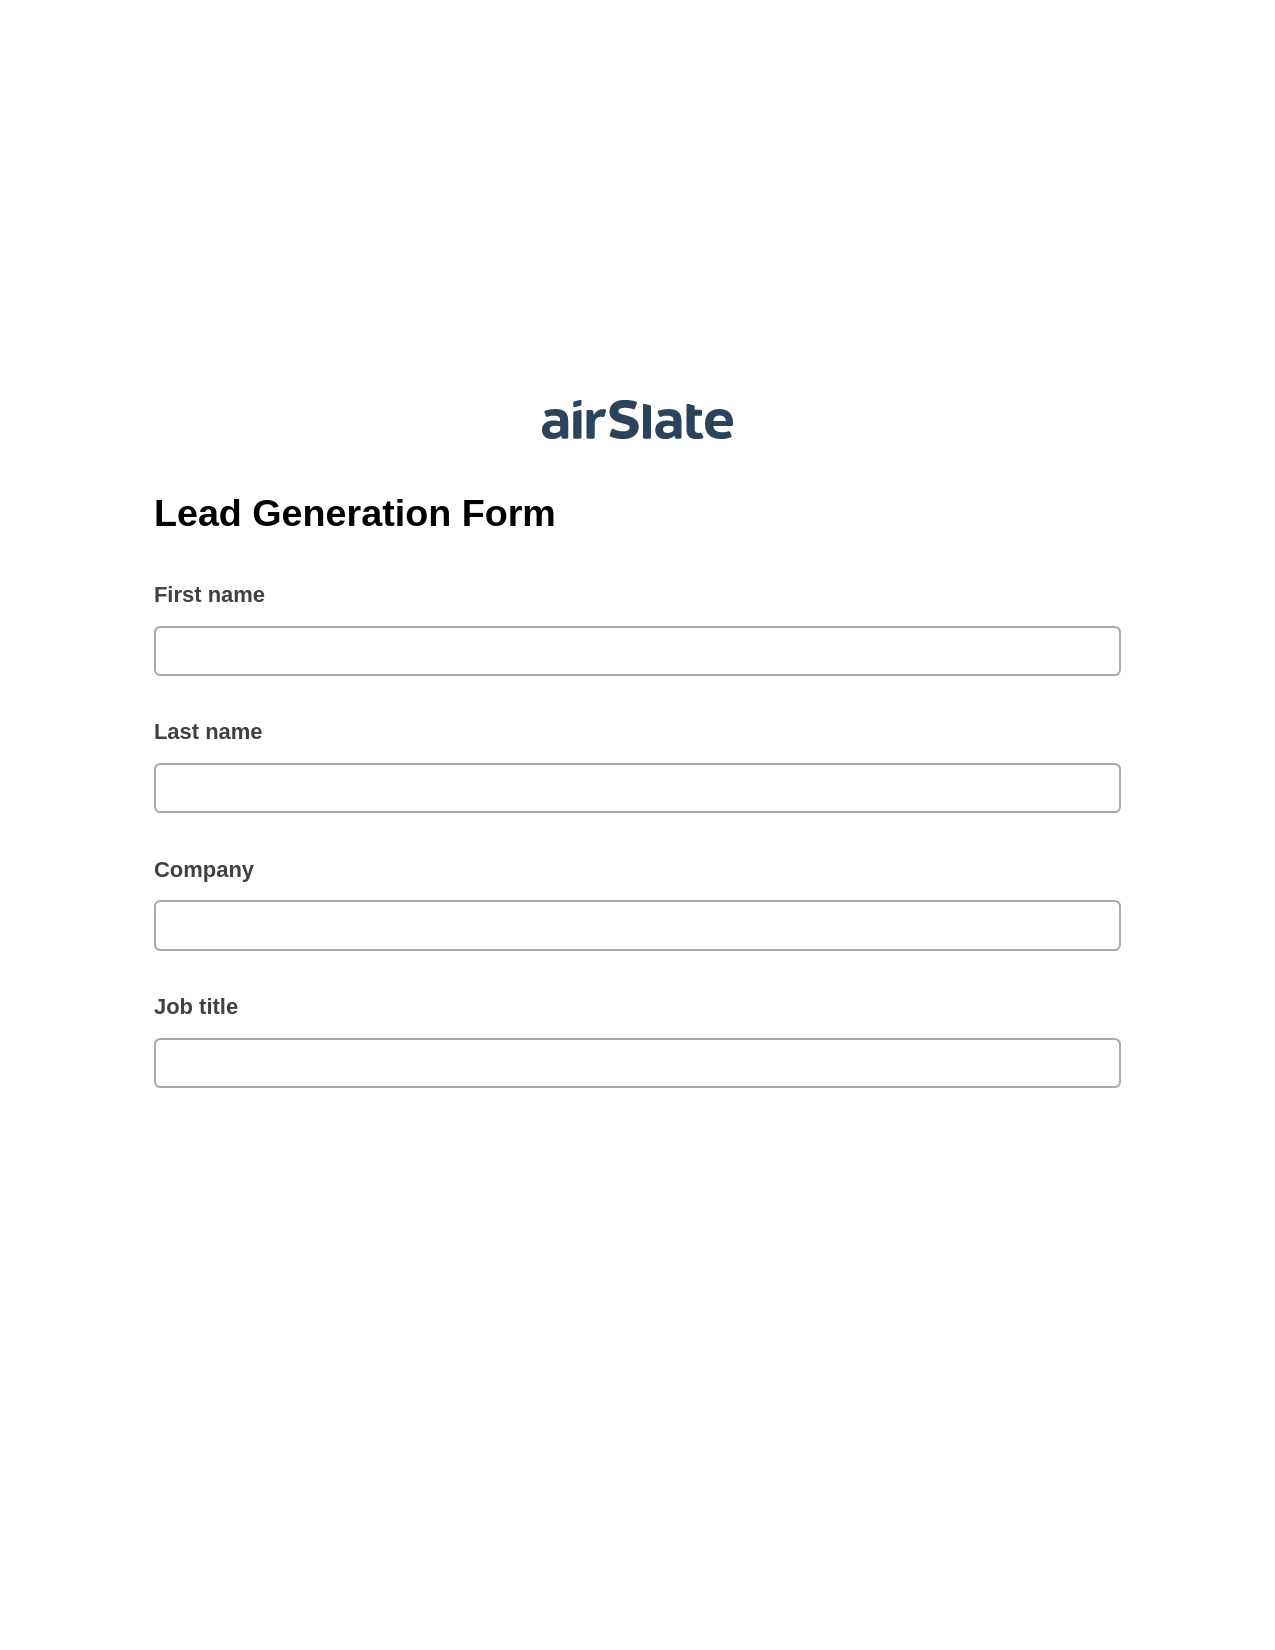 Lead Generation Form Pre-fill from Salesforce Records with SOQL Bot, Update MS Dynamics 365 Record Bot, Export to Google Sheet Bot